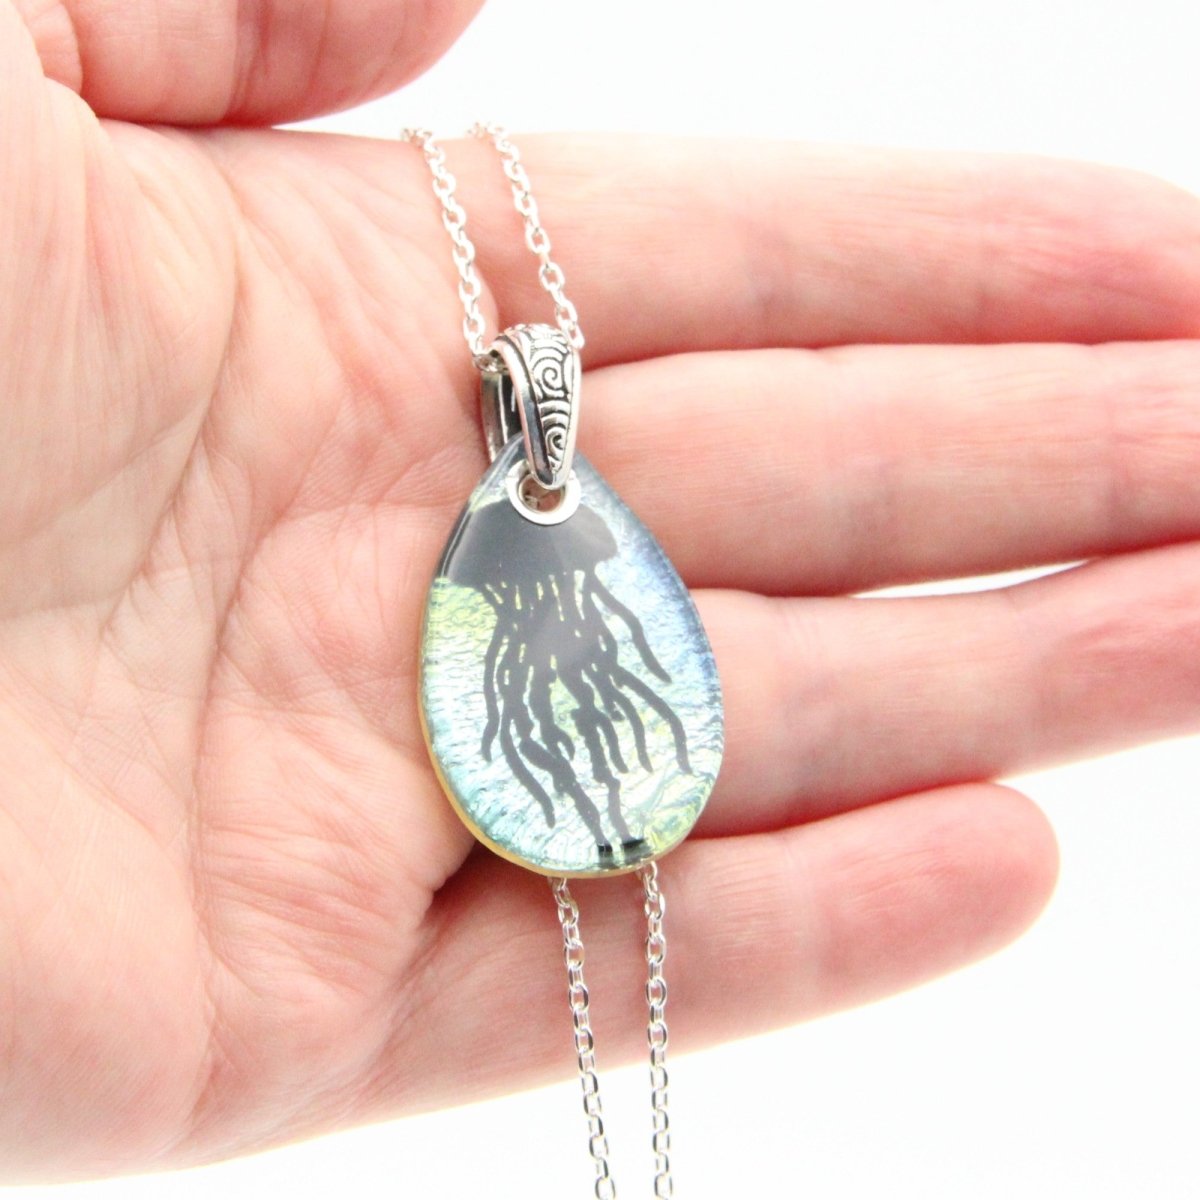 Blue and Green Jellyfish Glass Pendant on a Silver Chain